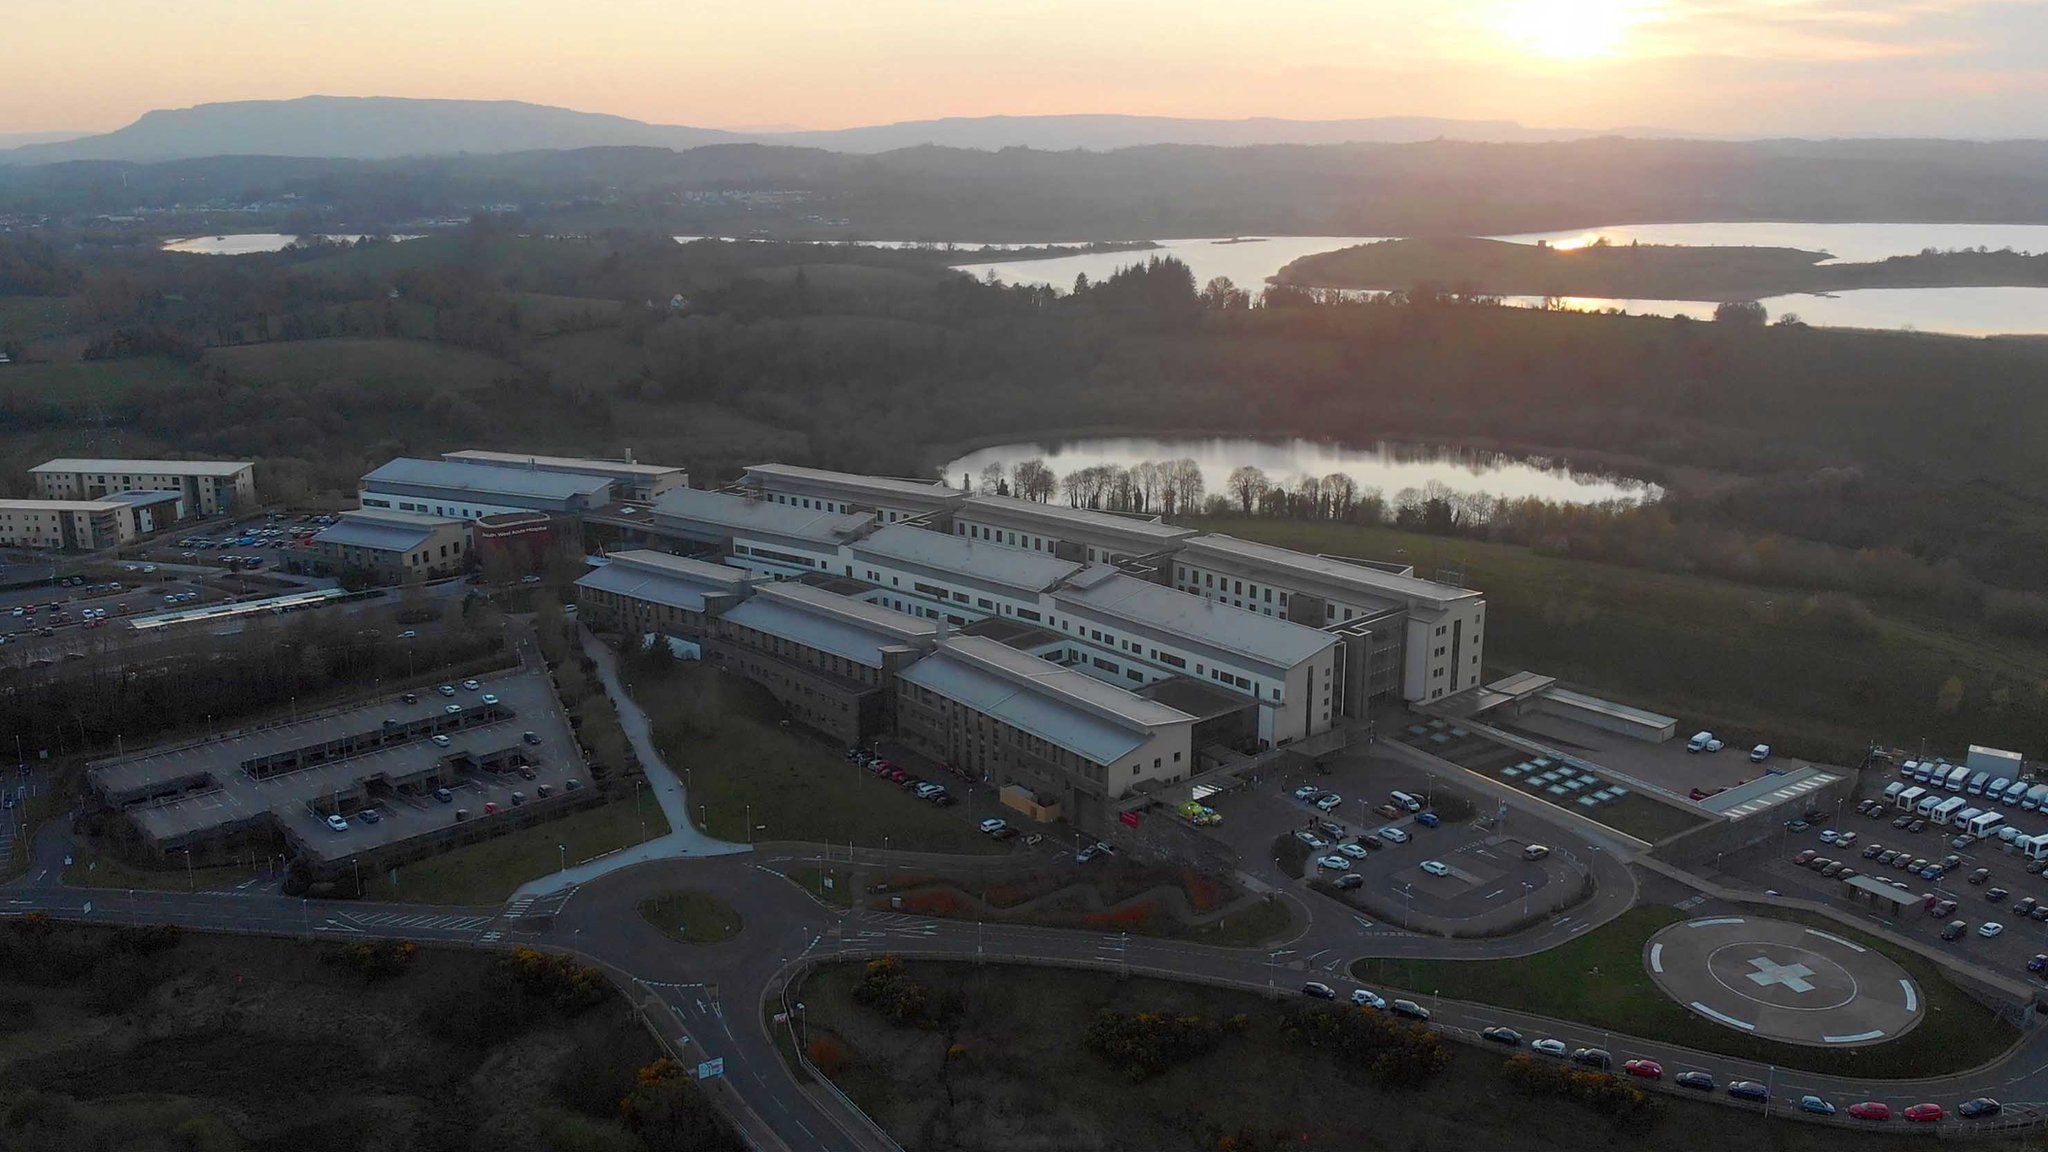 An aerial view of the South West Actue Hospital in Enniskillen